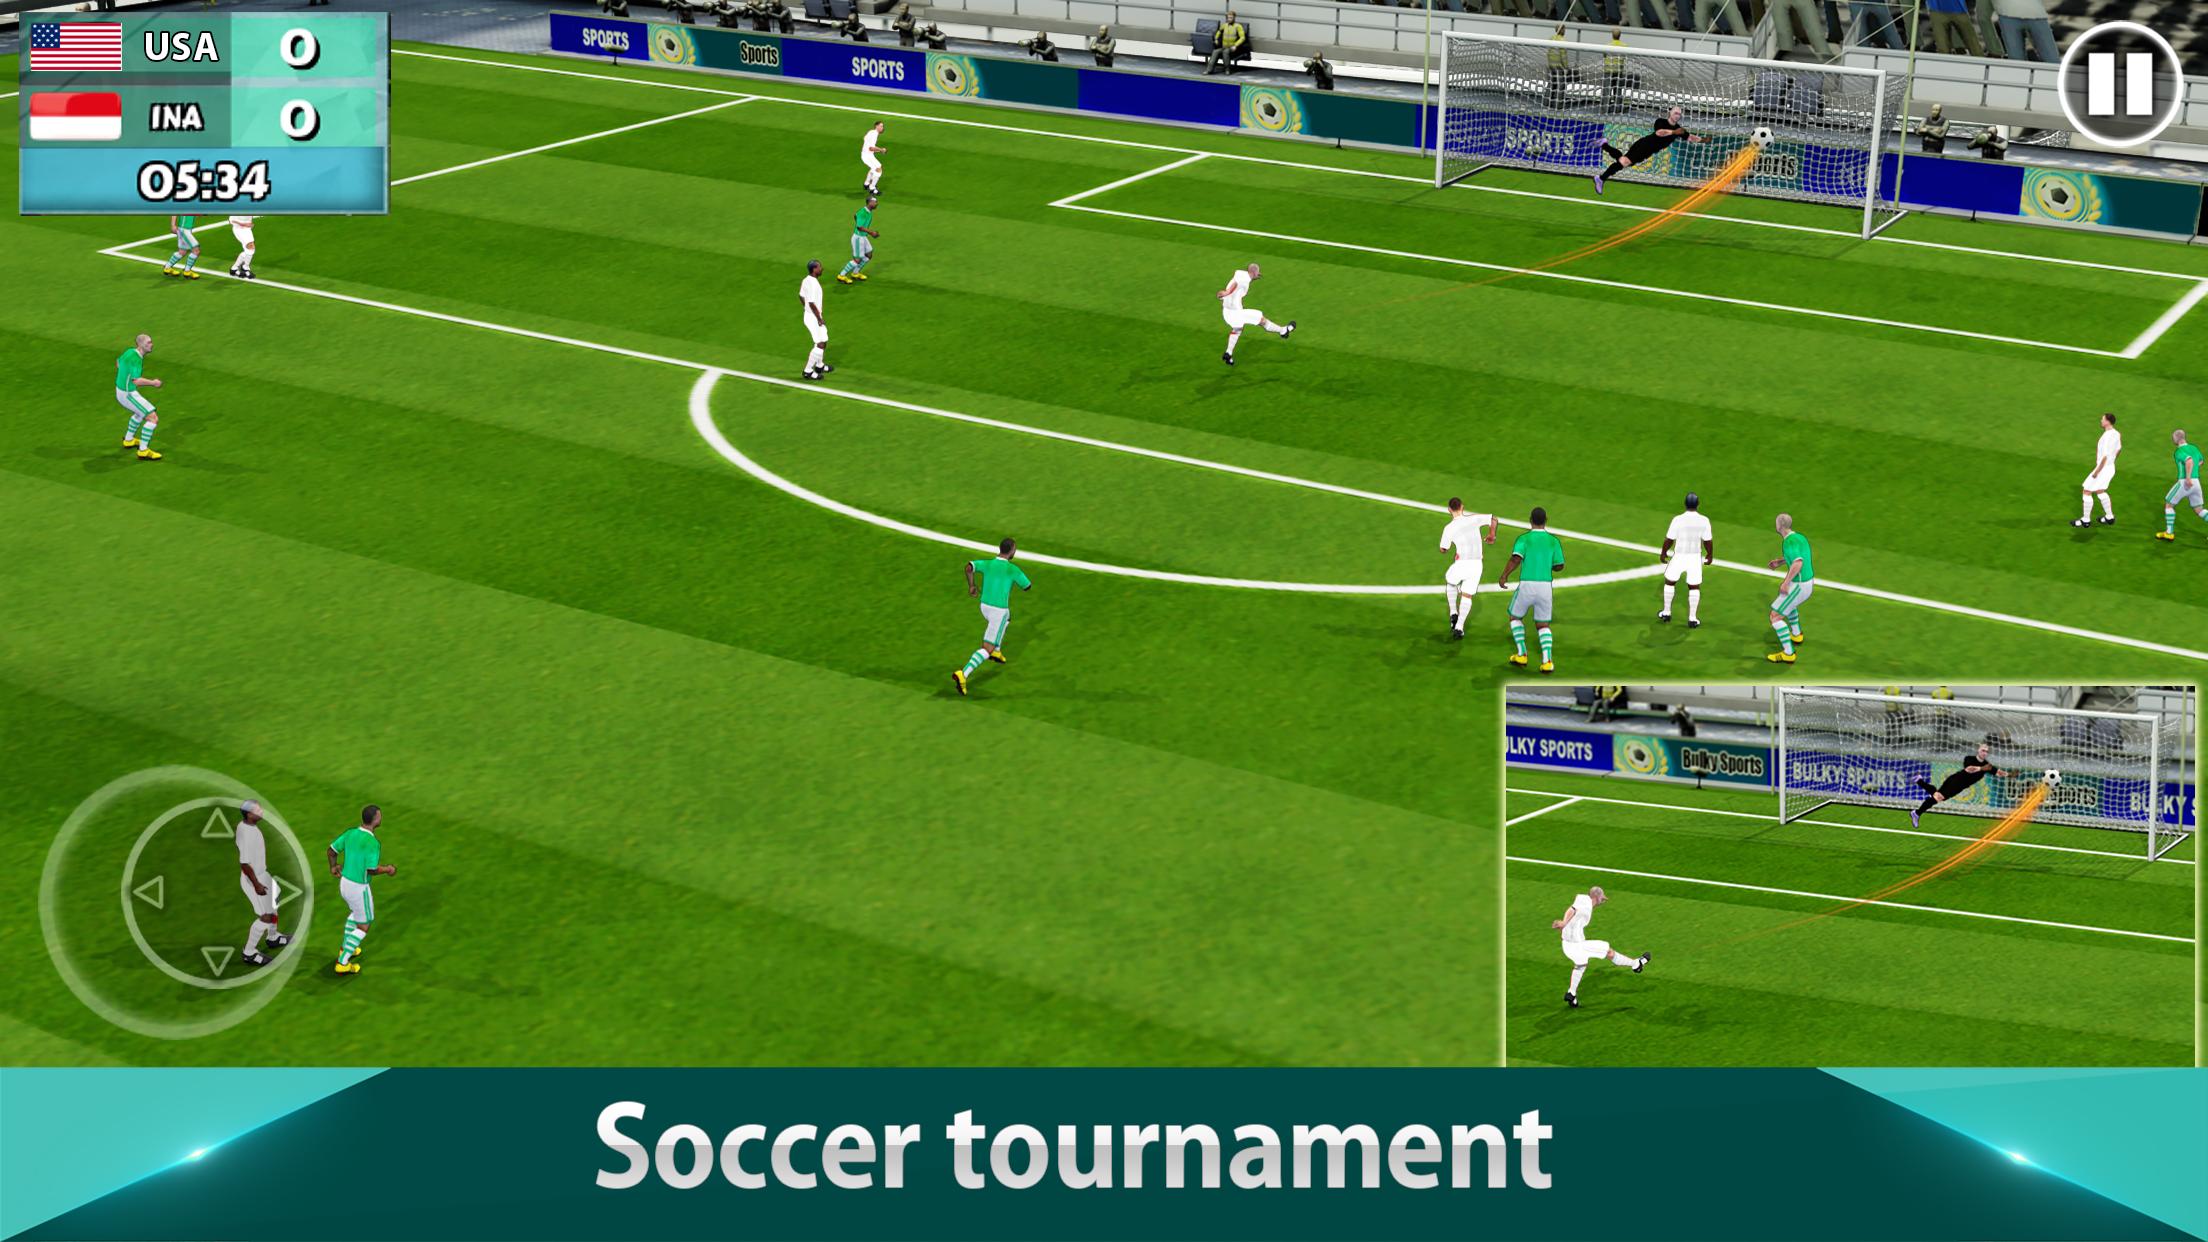 FIFA MOBILE - Download the Ultimate Soccer Gaming Experience - APK Android